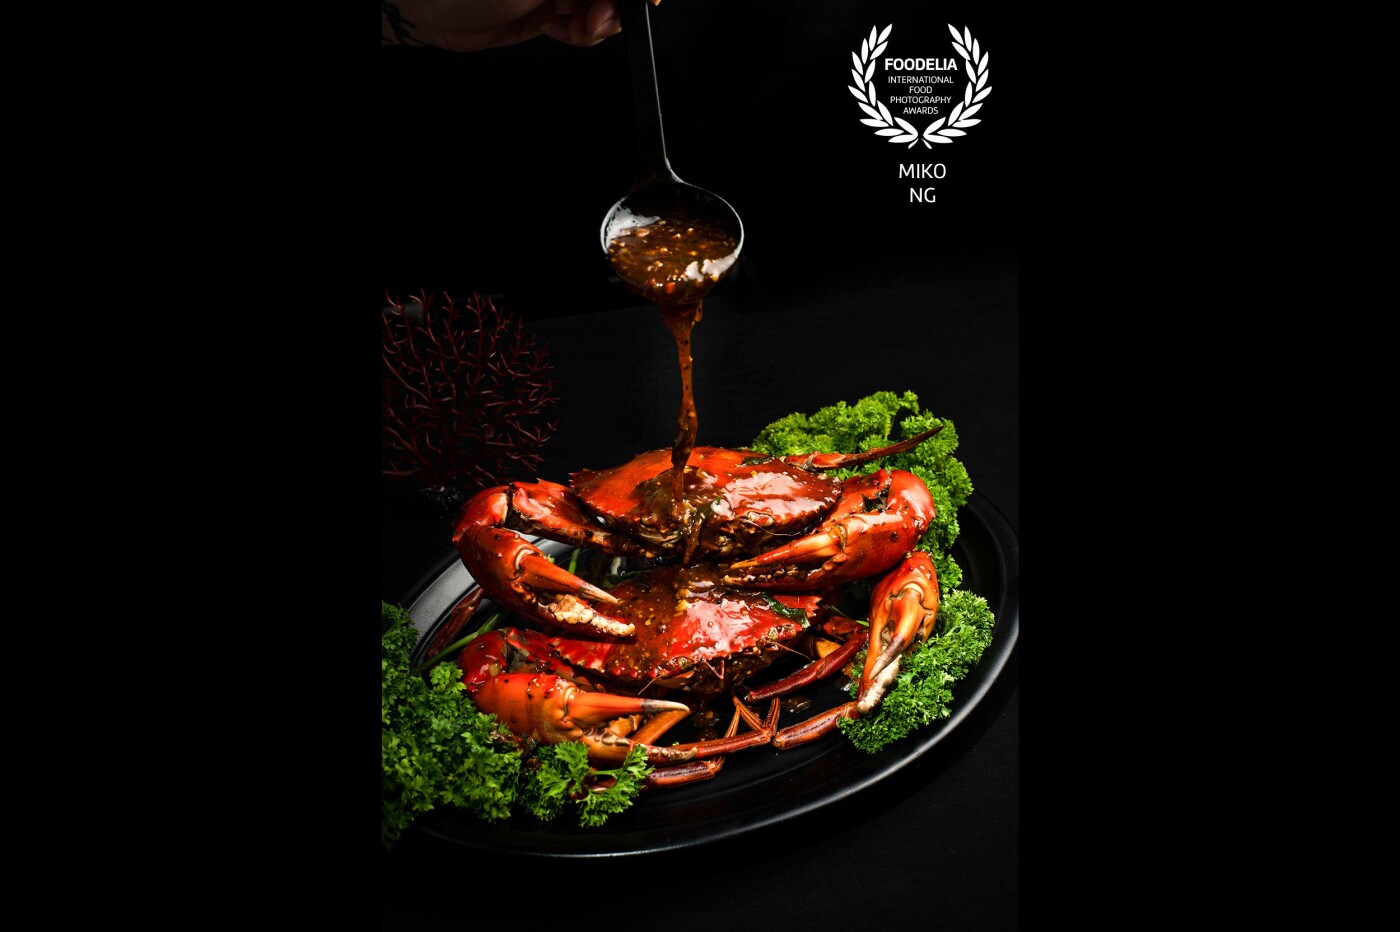 Black pepper crab is one of the two most popular ways that crab is served in Singaporean cuisine. It is made with hard-shell crabs, and fried with black pepper. Unlike the other popular chilli crab dish, it is not cooked in a sauce and therefore has a dry consistency.